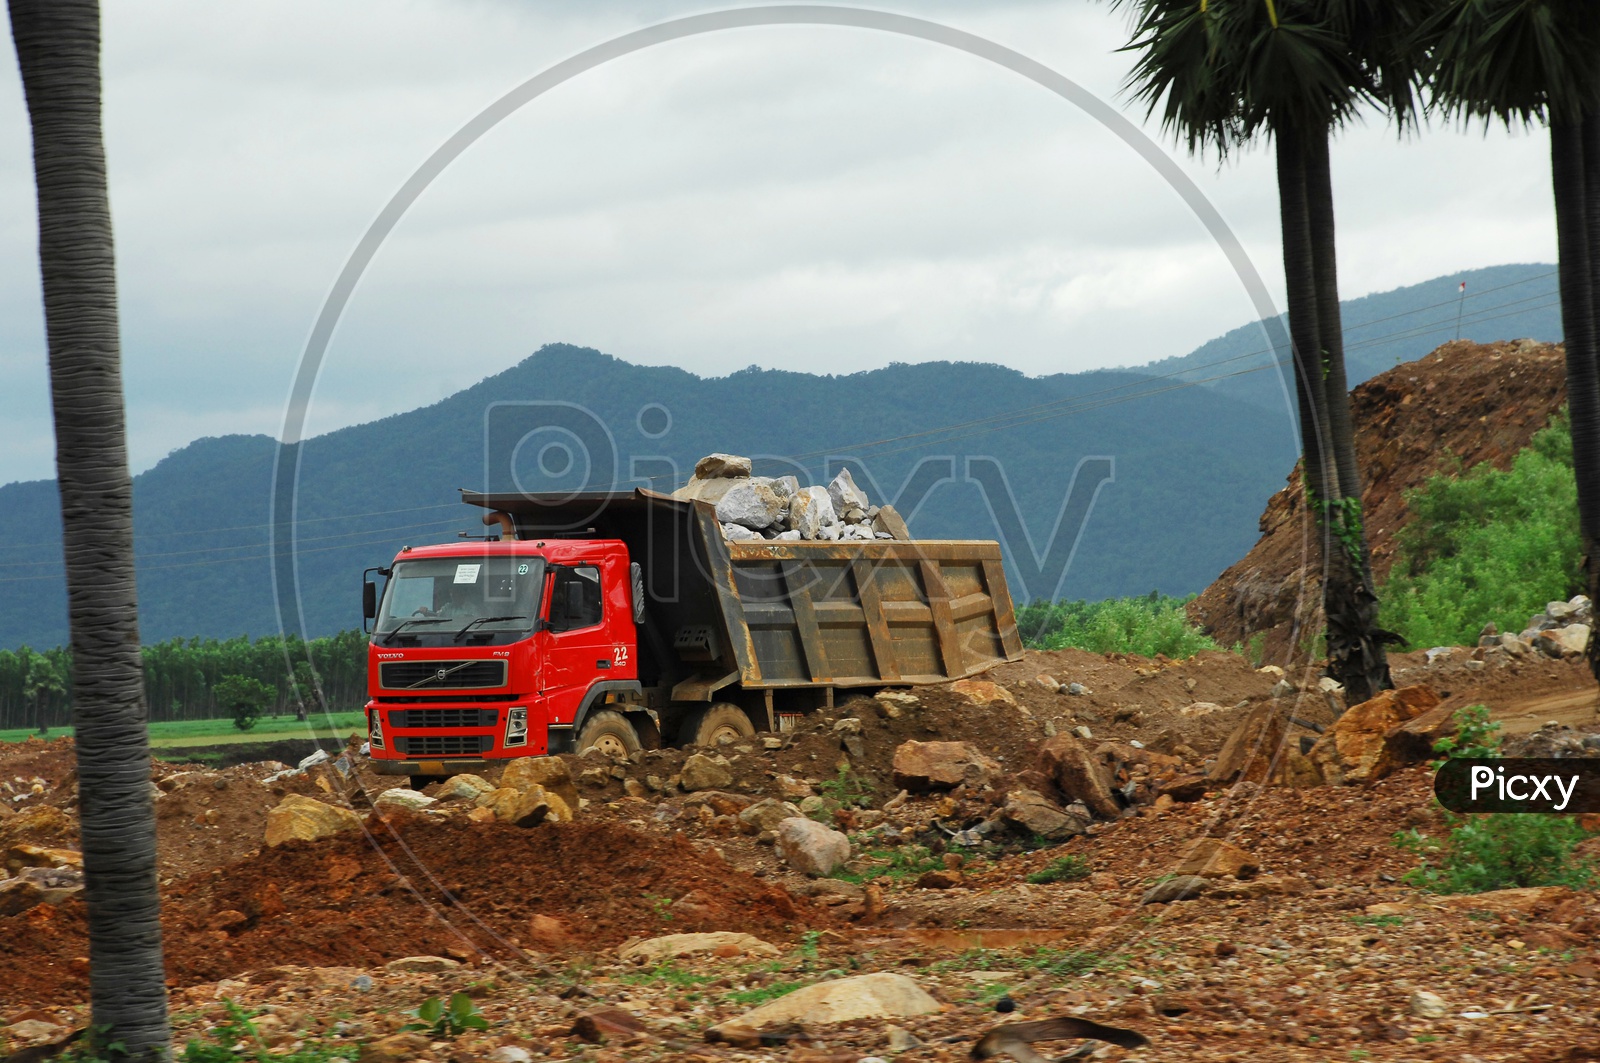 Heavy truck carrying a load of rocks